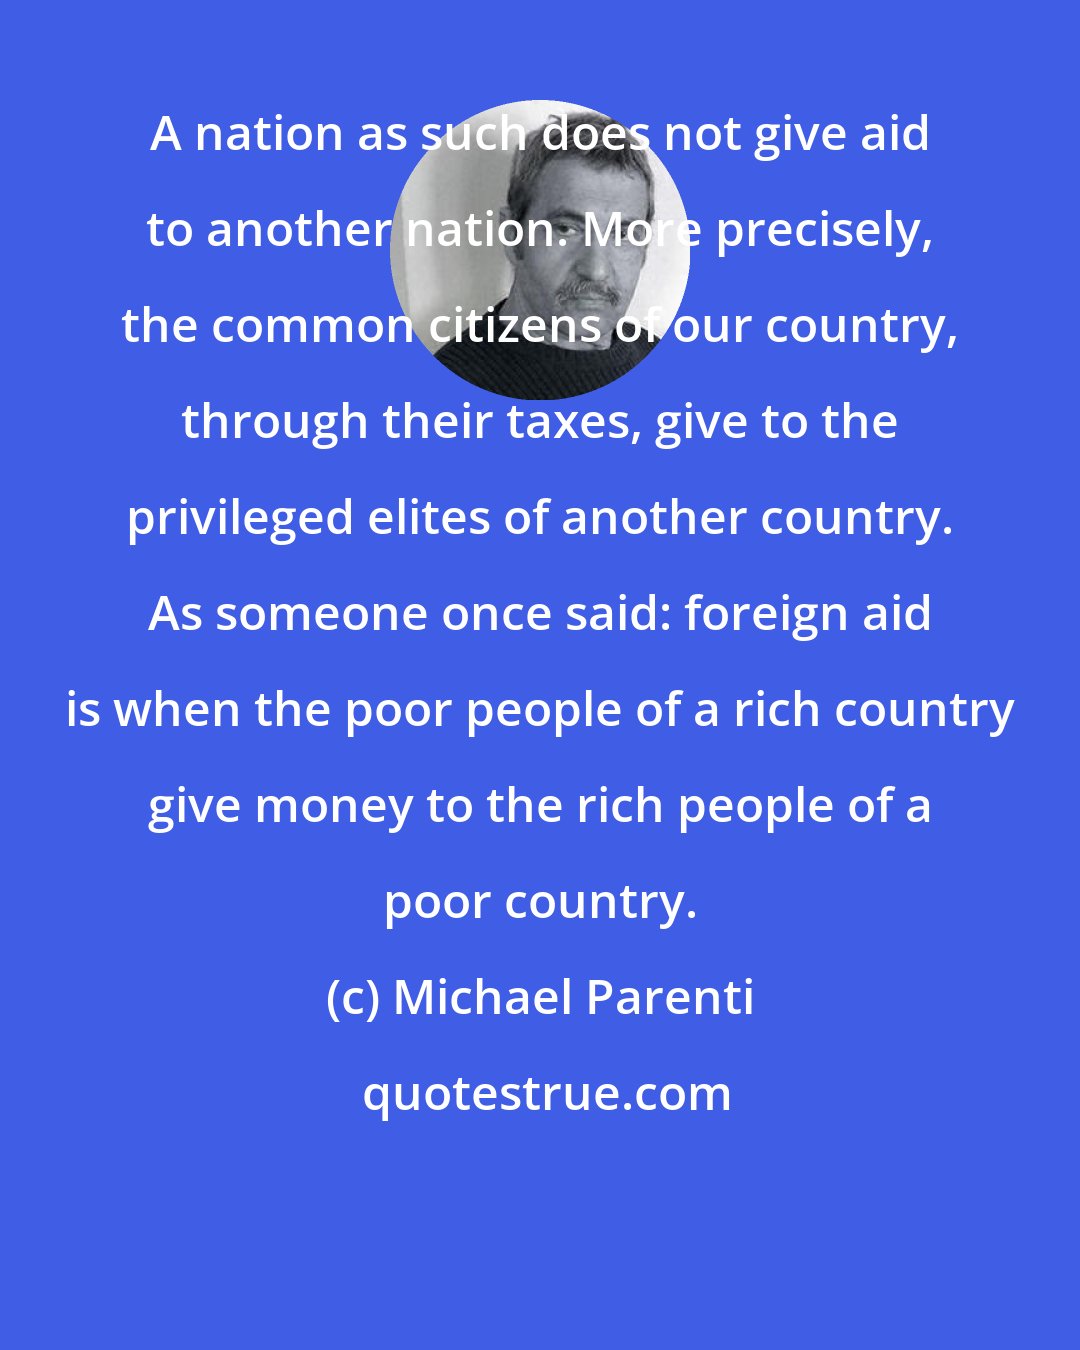 Michael Parenti: A nation as such does not give aid to another nation. More precisely, the common citizens of our country, through their taxes, give to the privileged elites of another country. As someone once said: foreign aid is when the poor people of a rich country give money to the rich people of a poor country.